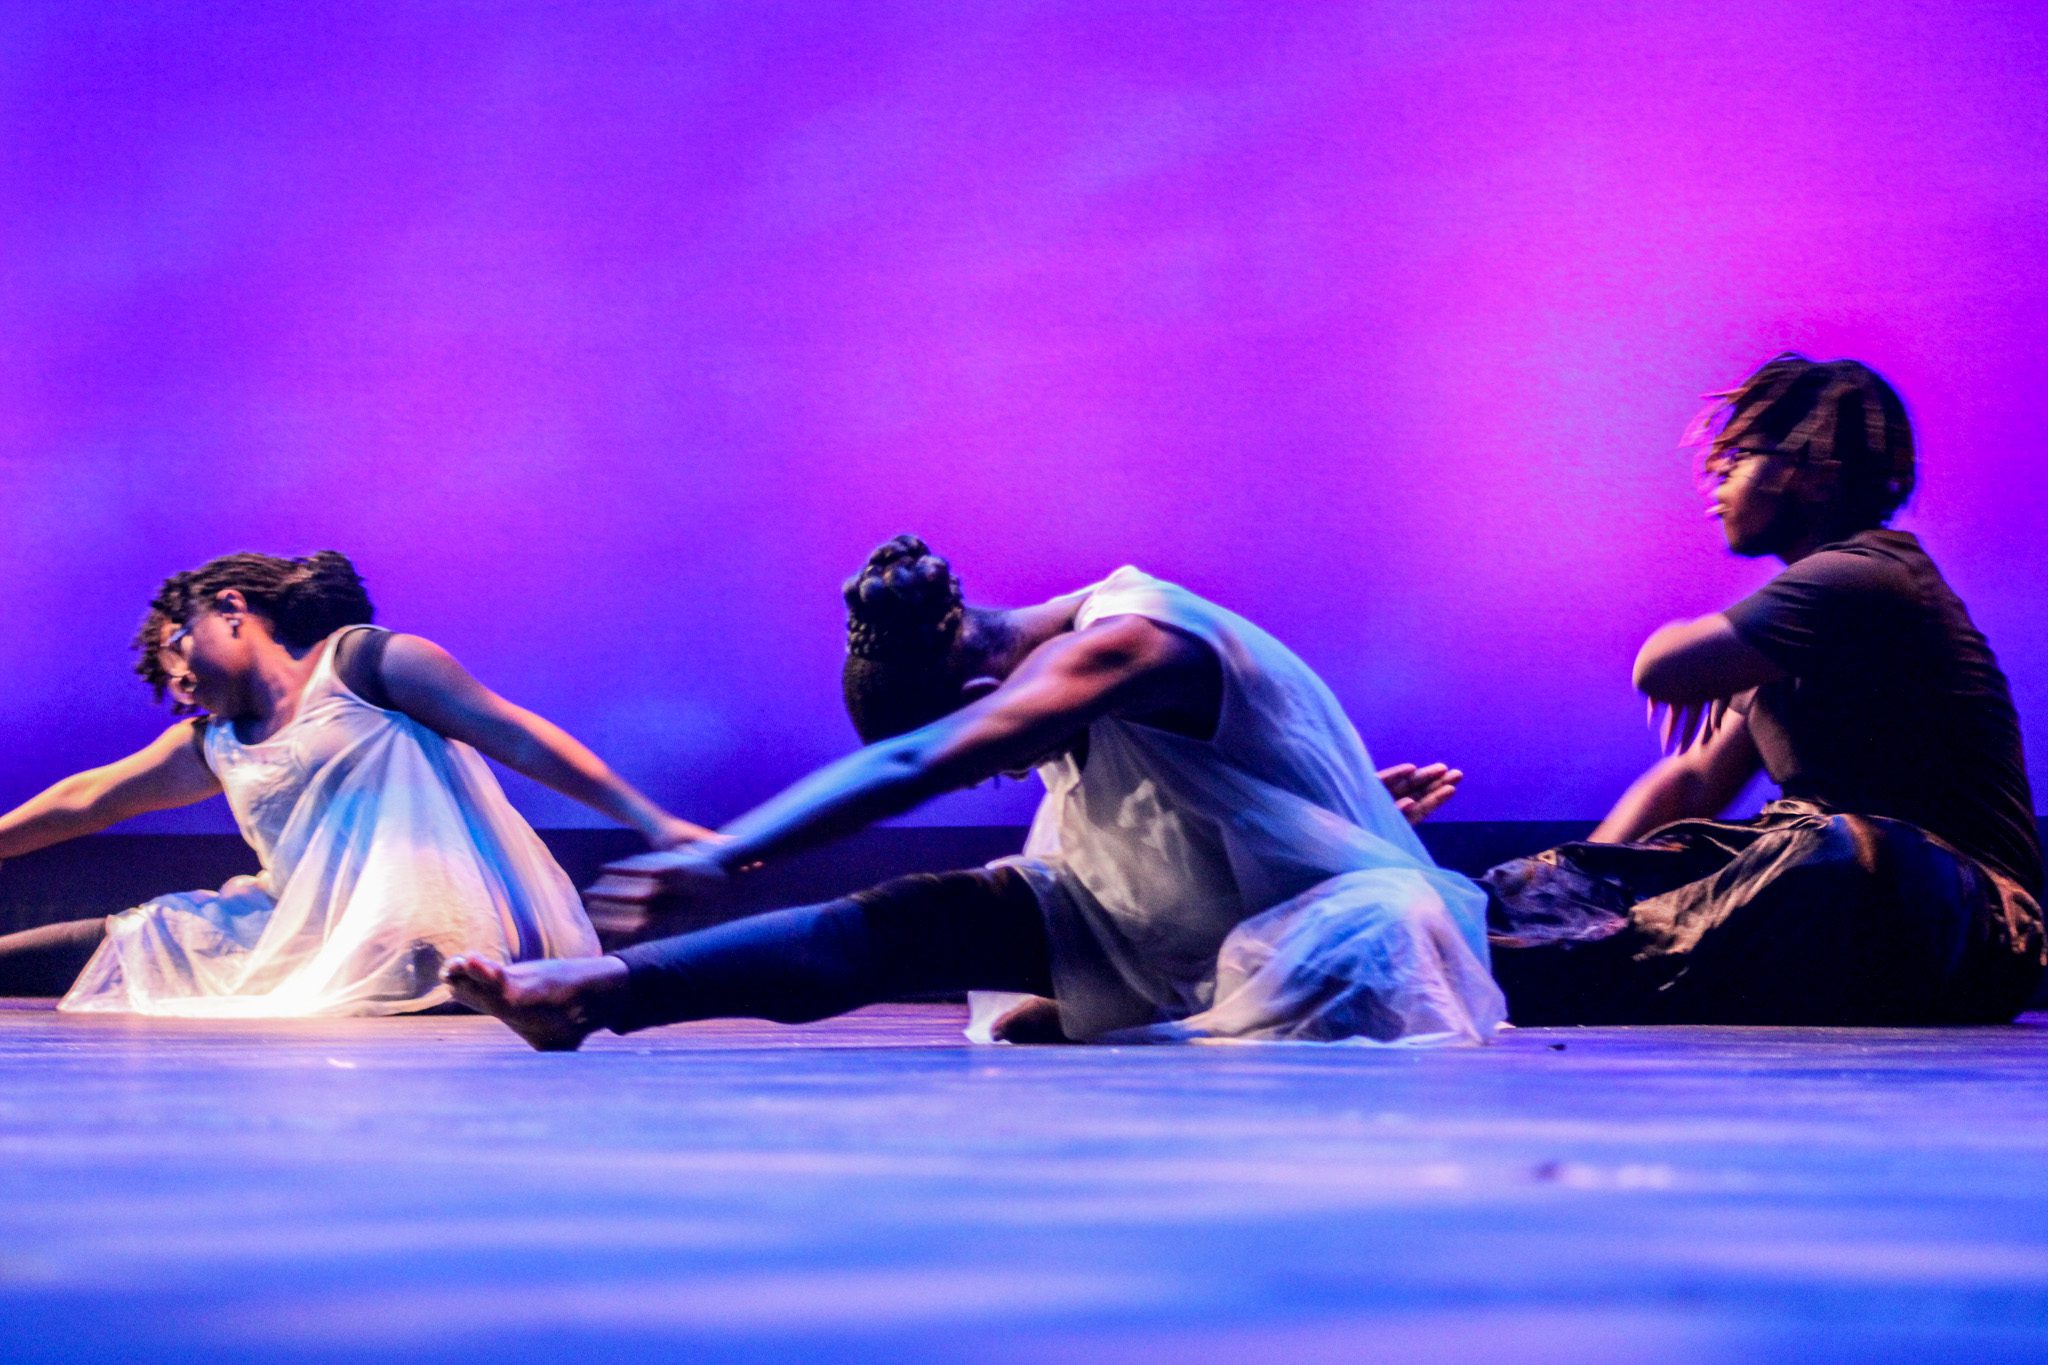 Three dancers are visible. The dancers are wearing a white, sheer-like dress, They are laying on the ground with their heads lowering to their body. They have their arms stretched out to touch their legs. The background is a gradient of purple and light purple.